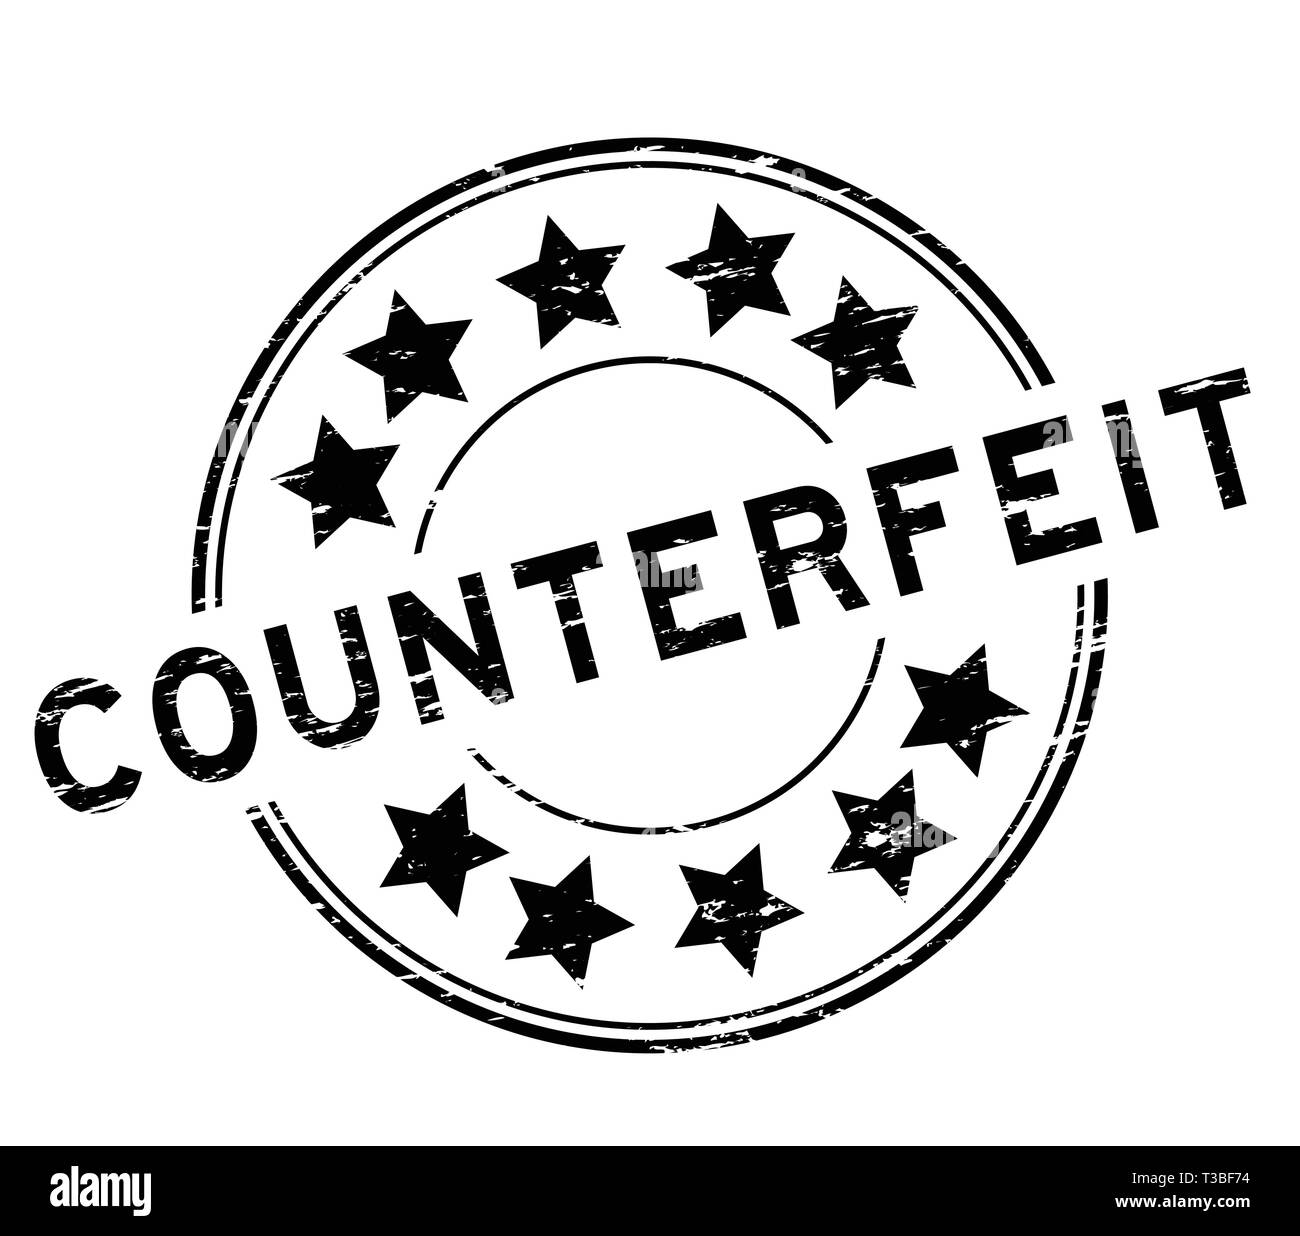 Grunge black counterfeit with star icon round rubber stamp on white background Stock Vector